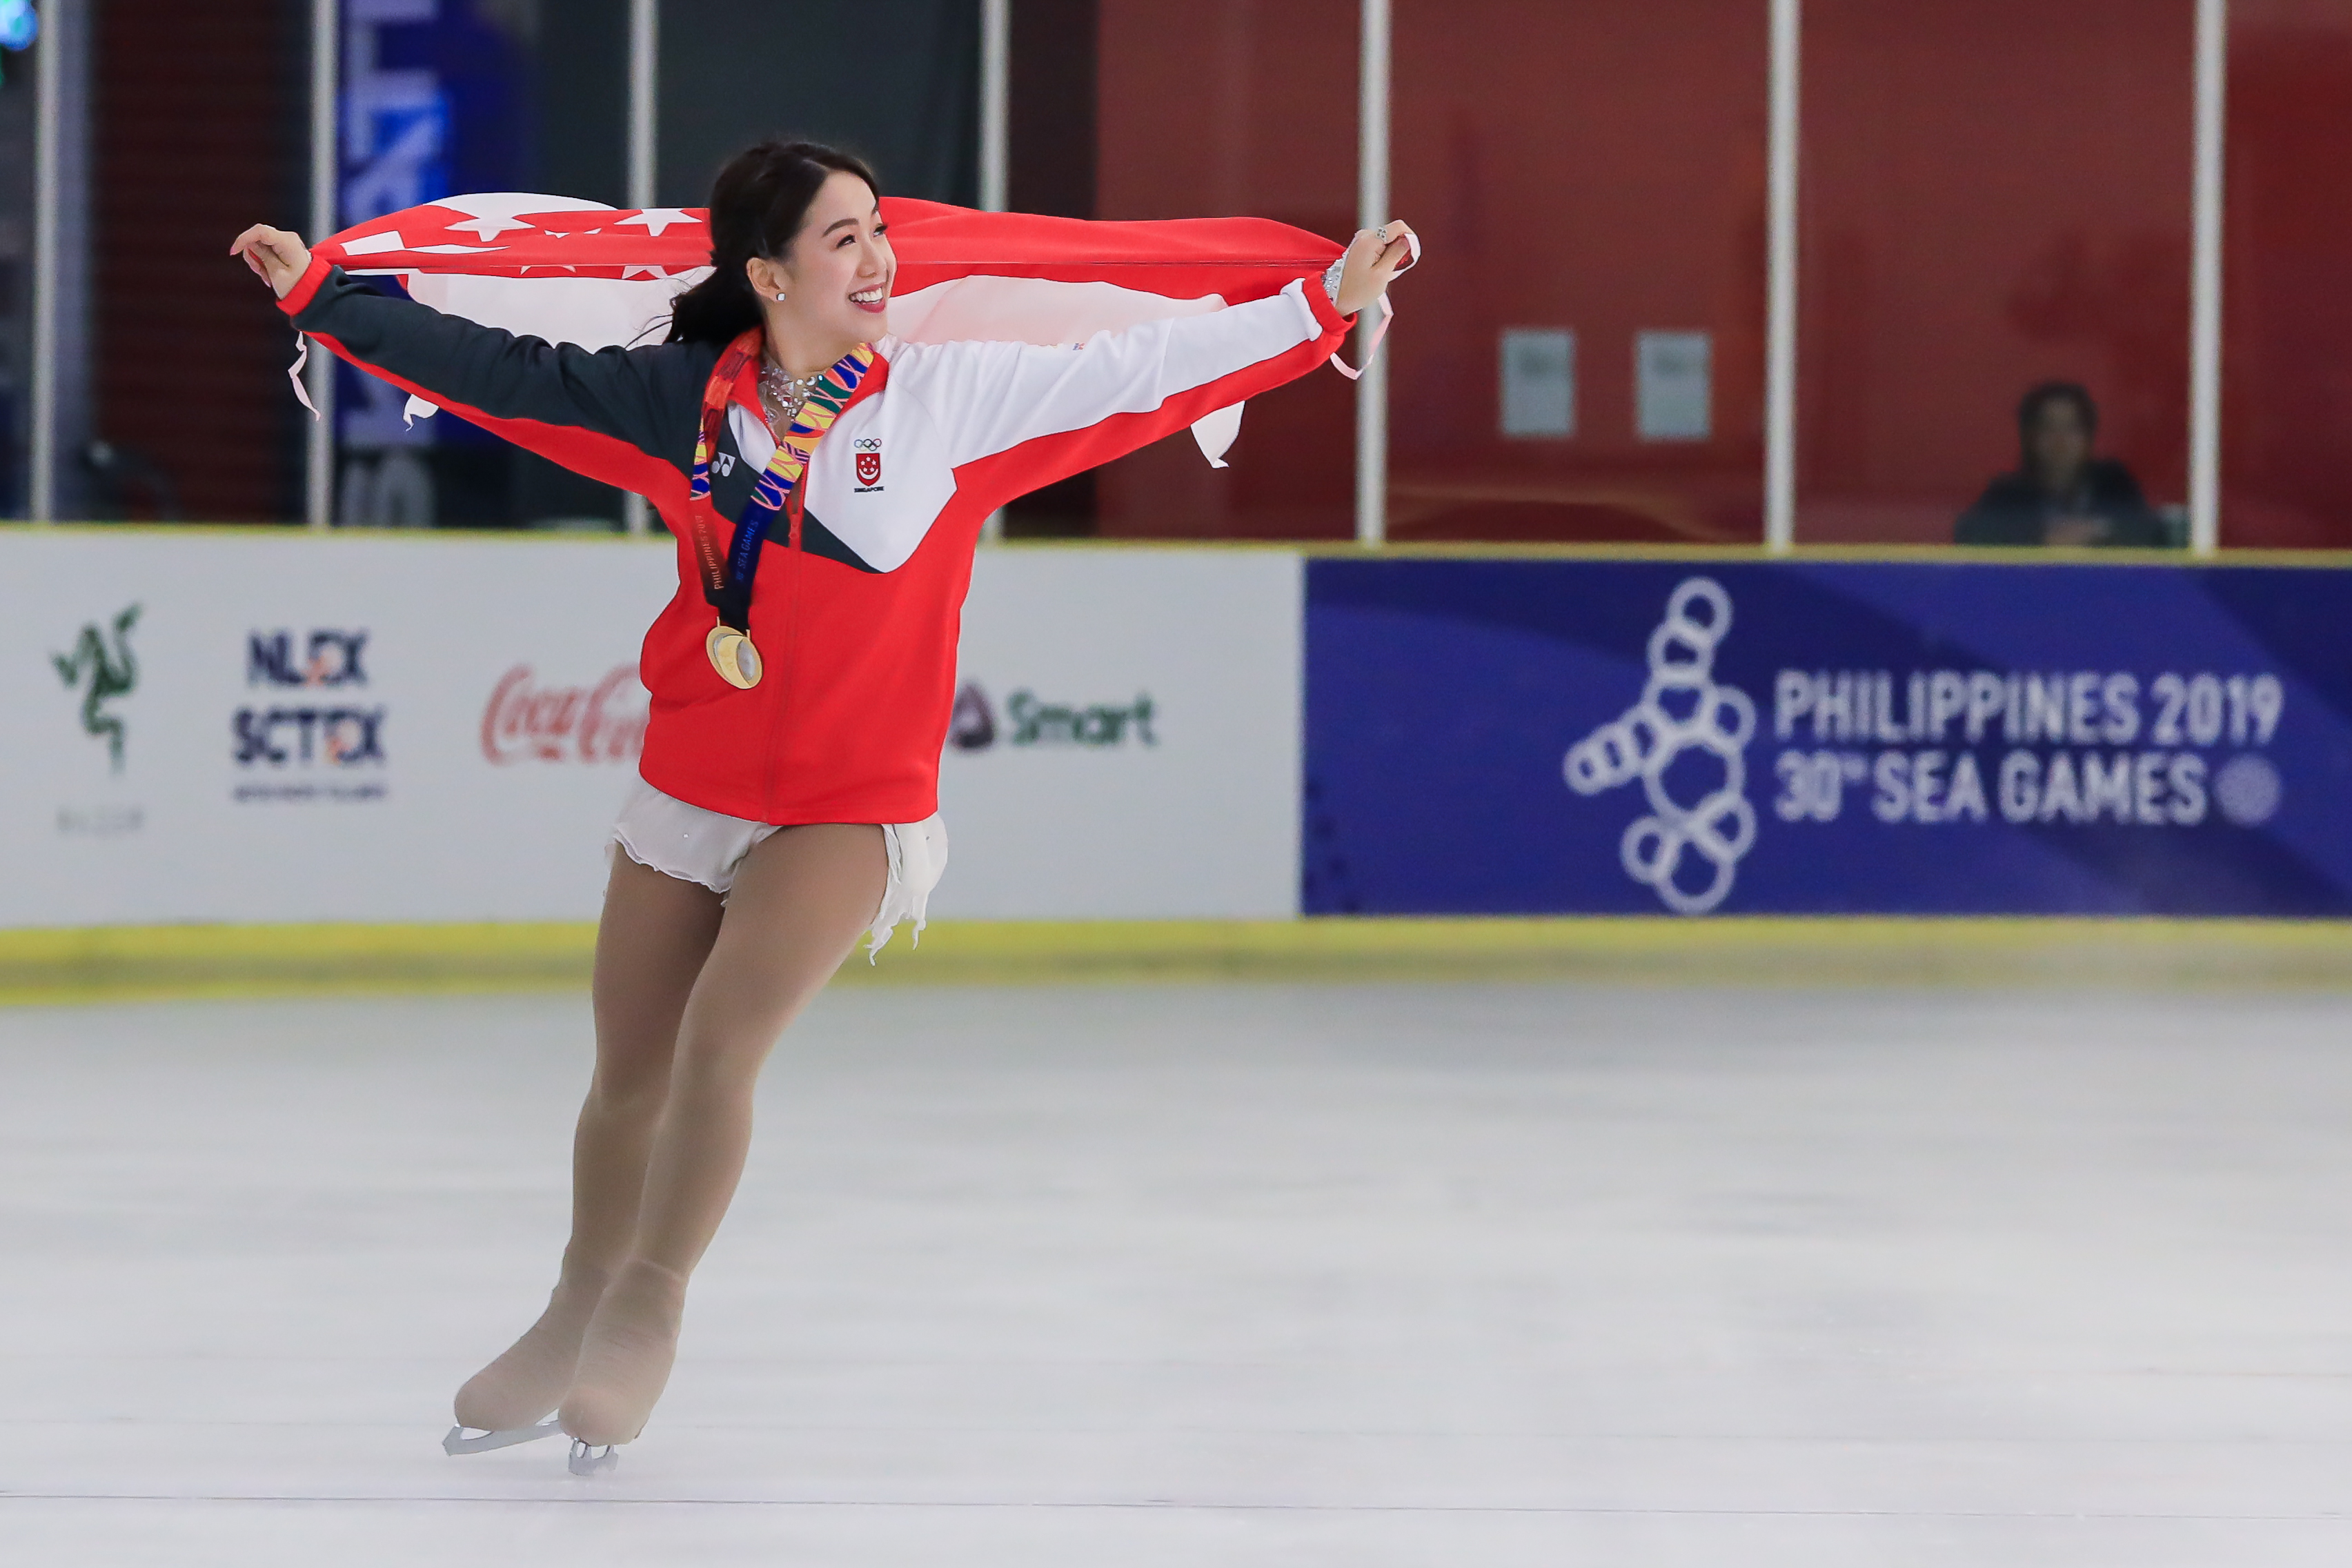 image of chloe ing skating around the rink with her gold medal and flag